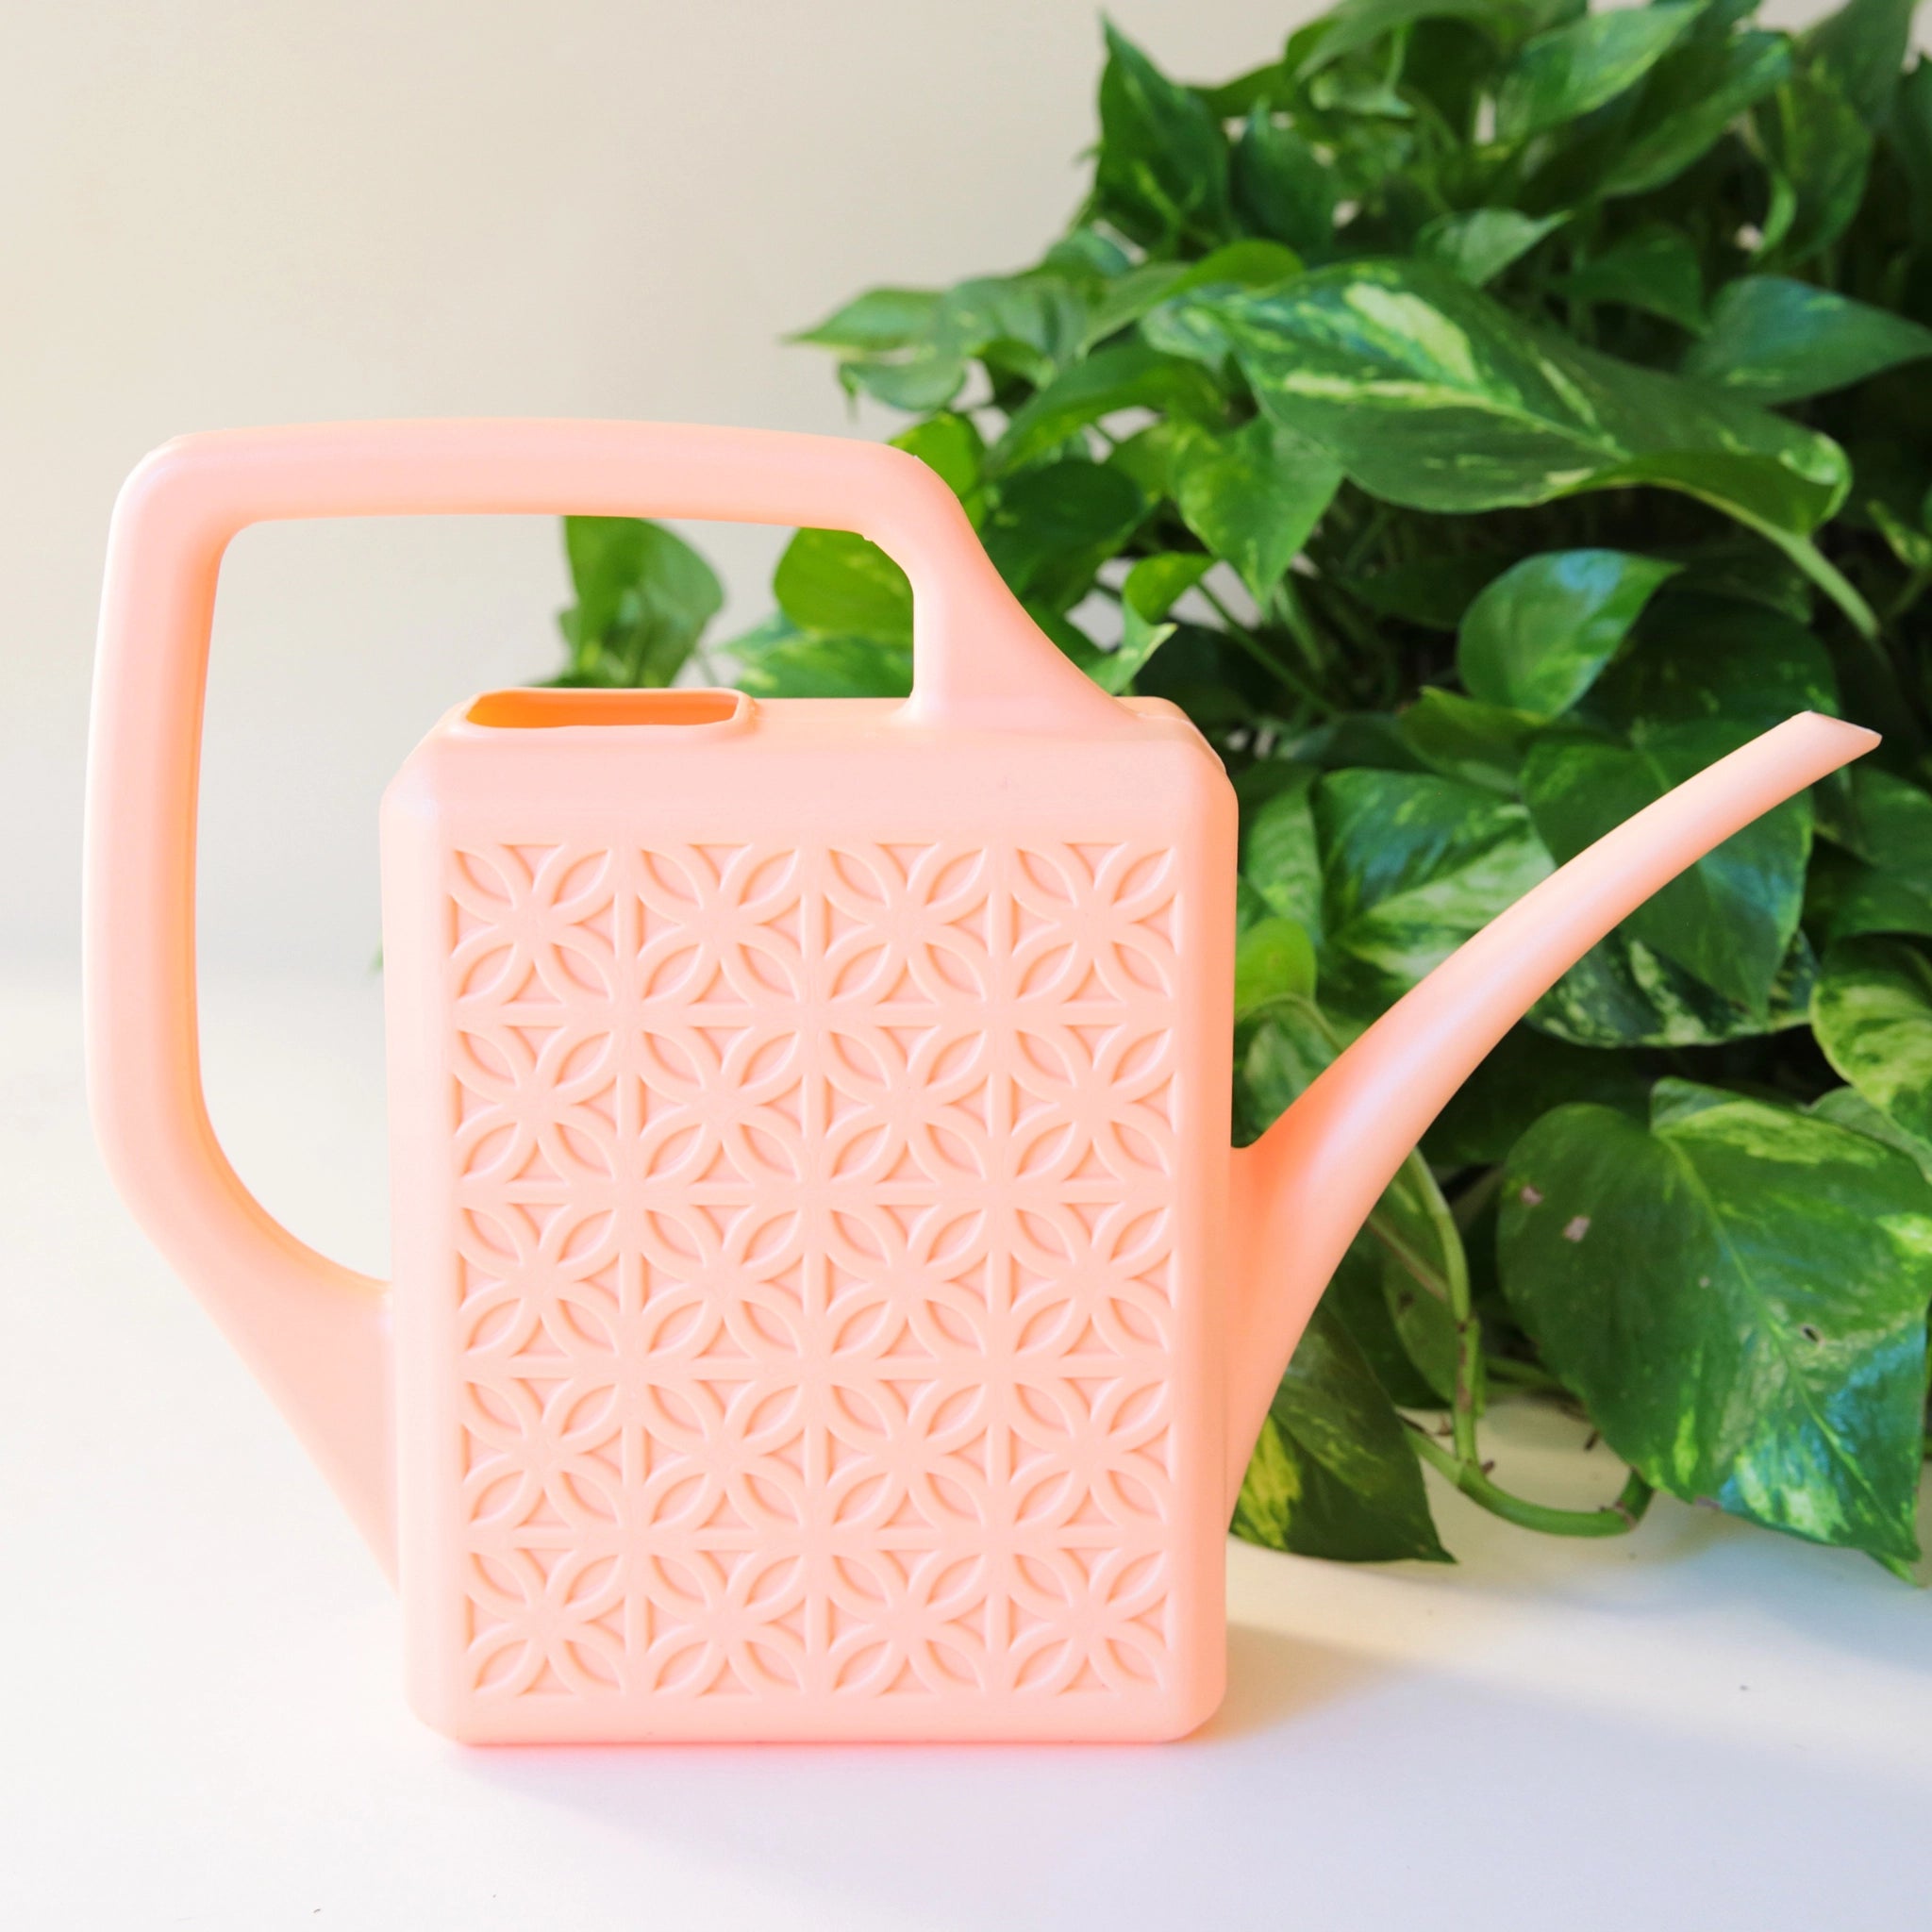 A peach plastic watering can with a narrow spout and square handle and a rectangle breeze block design on the sides.